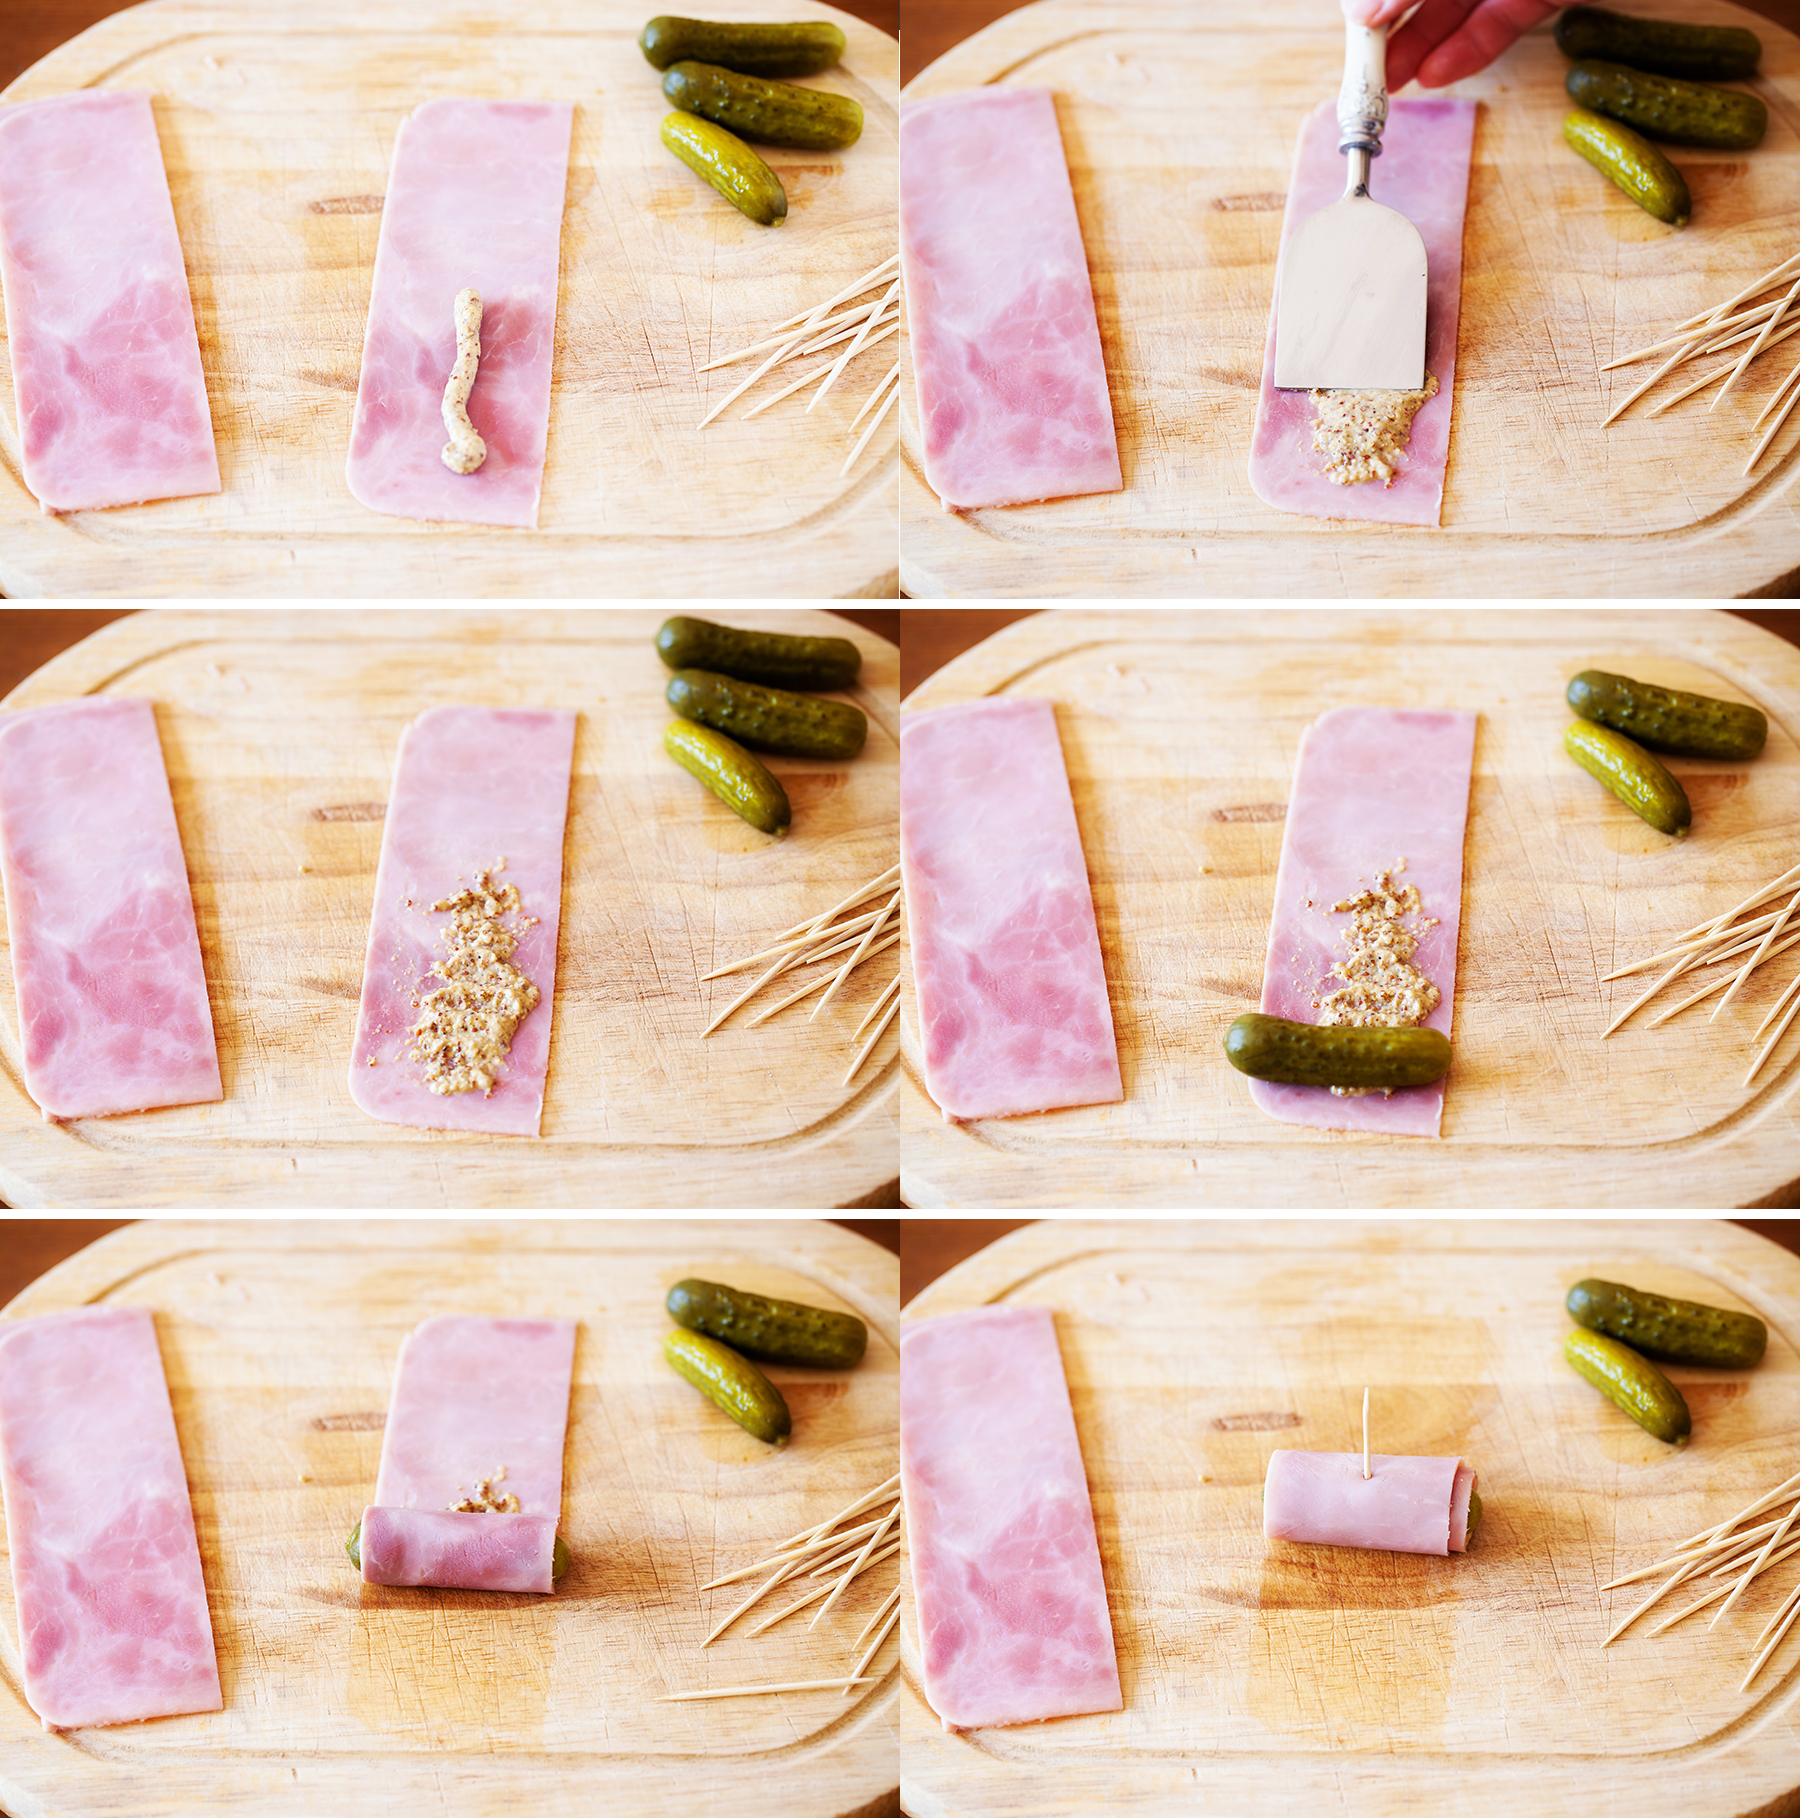 Ham Wrapped Cornichons are salty, sour, and crunchy. Made with only three ingredients, they make the perfect appetizer or game day snack!